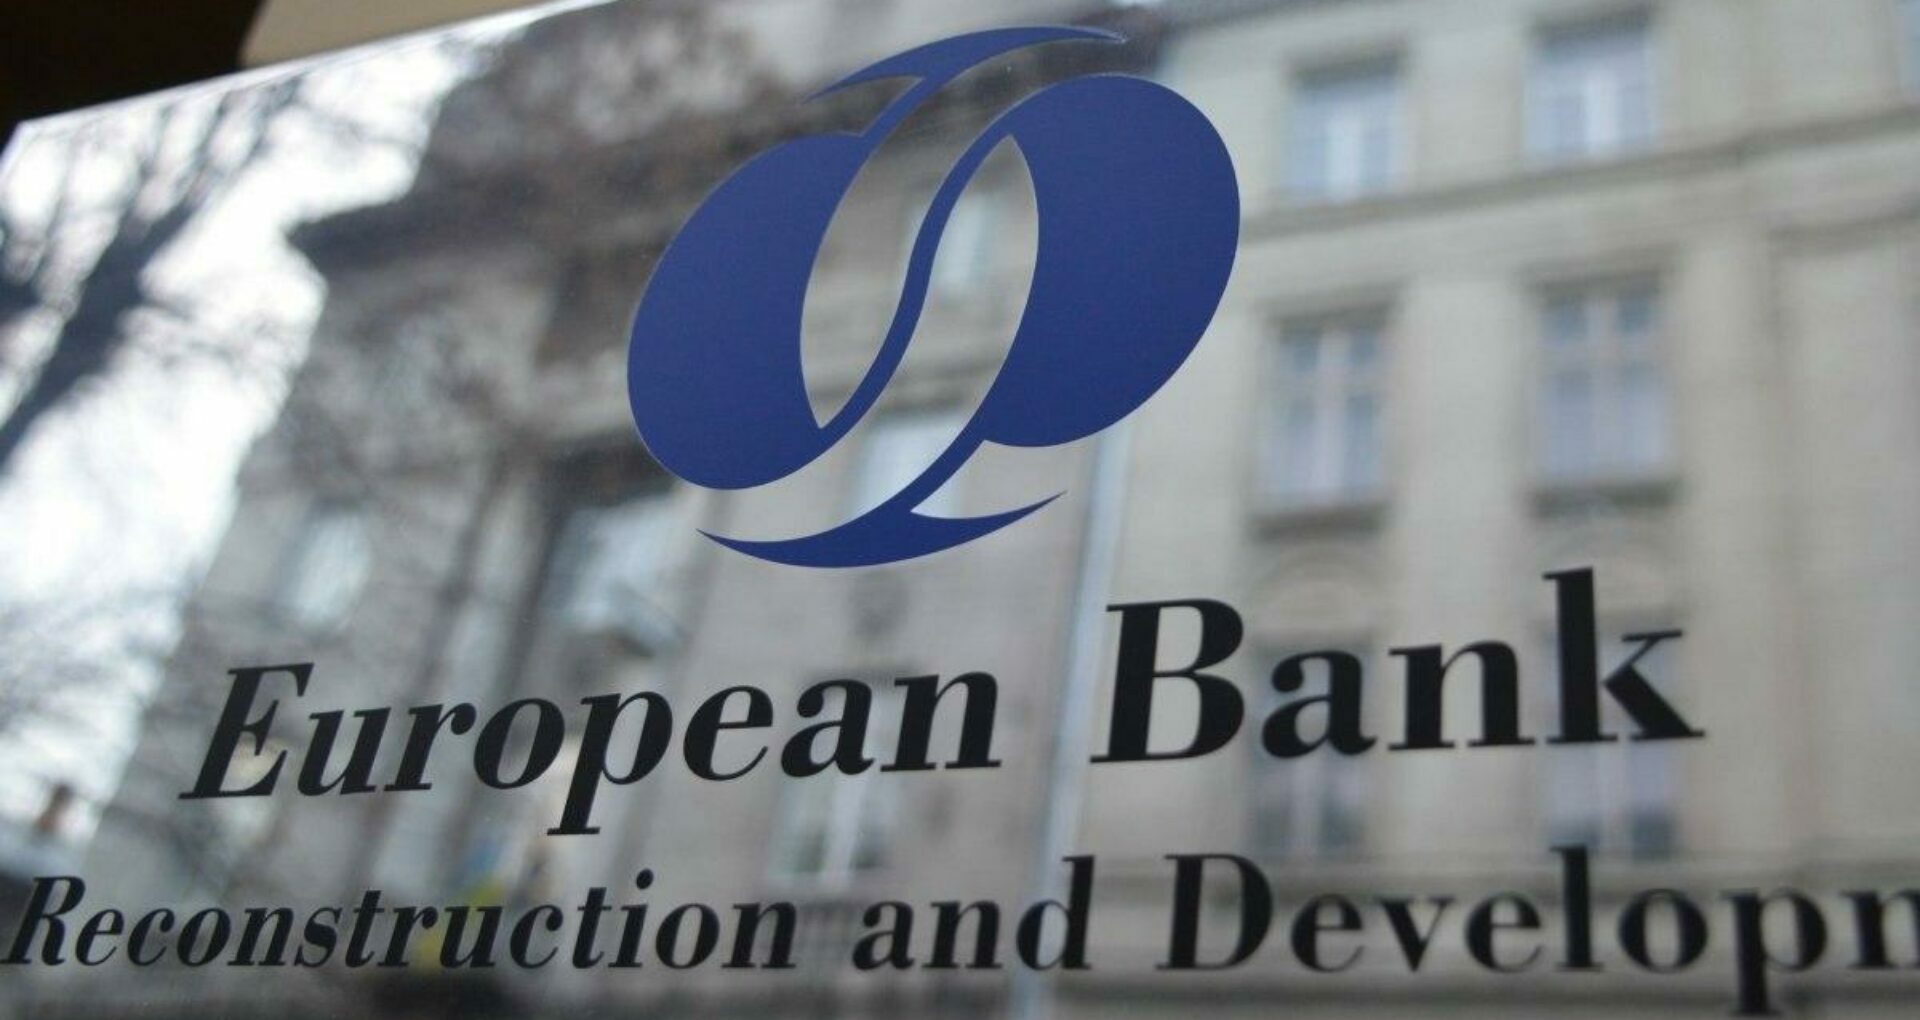 Chisinau City Hall Receives EBRD Loan Within the “Solid Waste Chisinau” Project